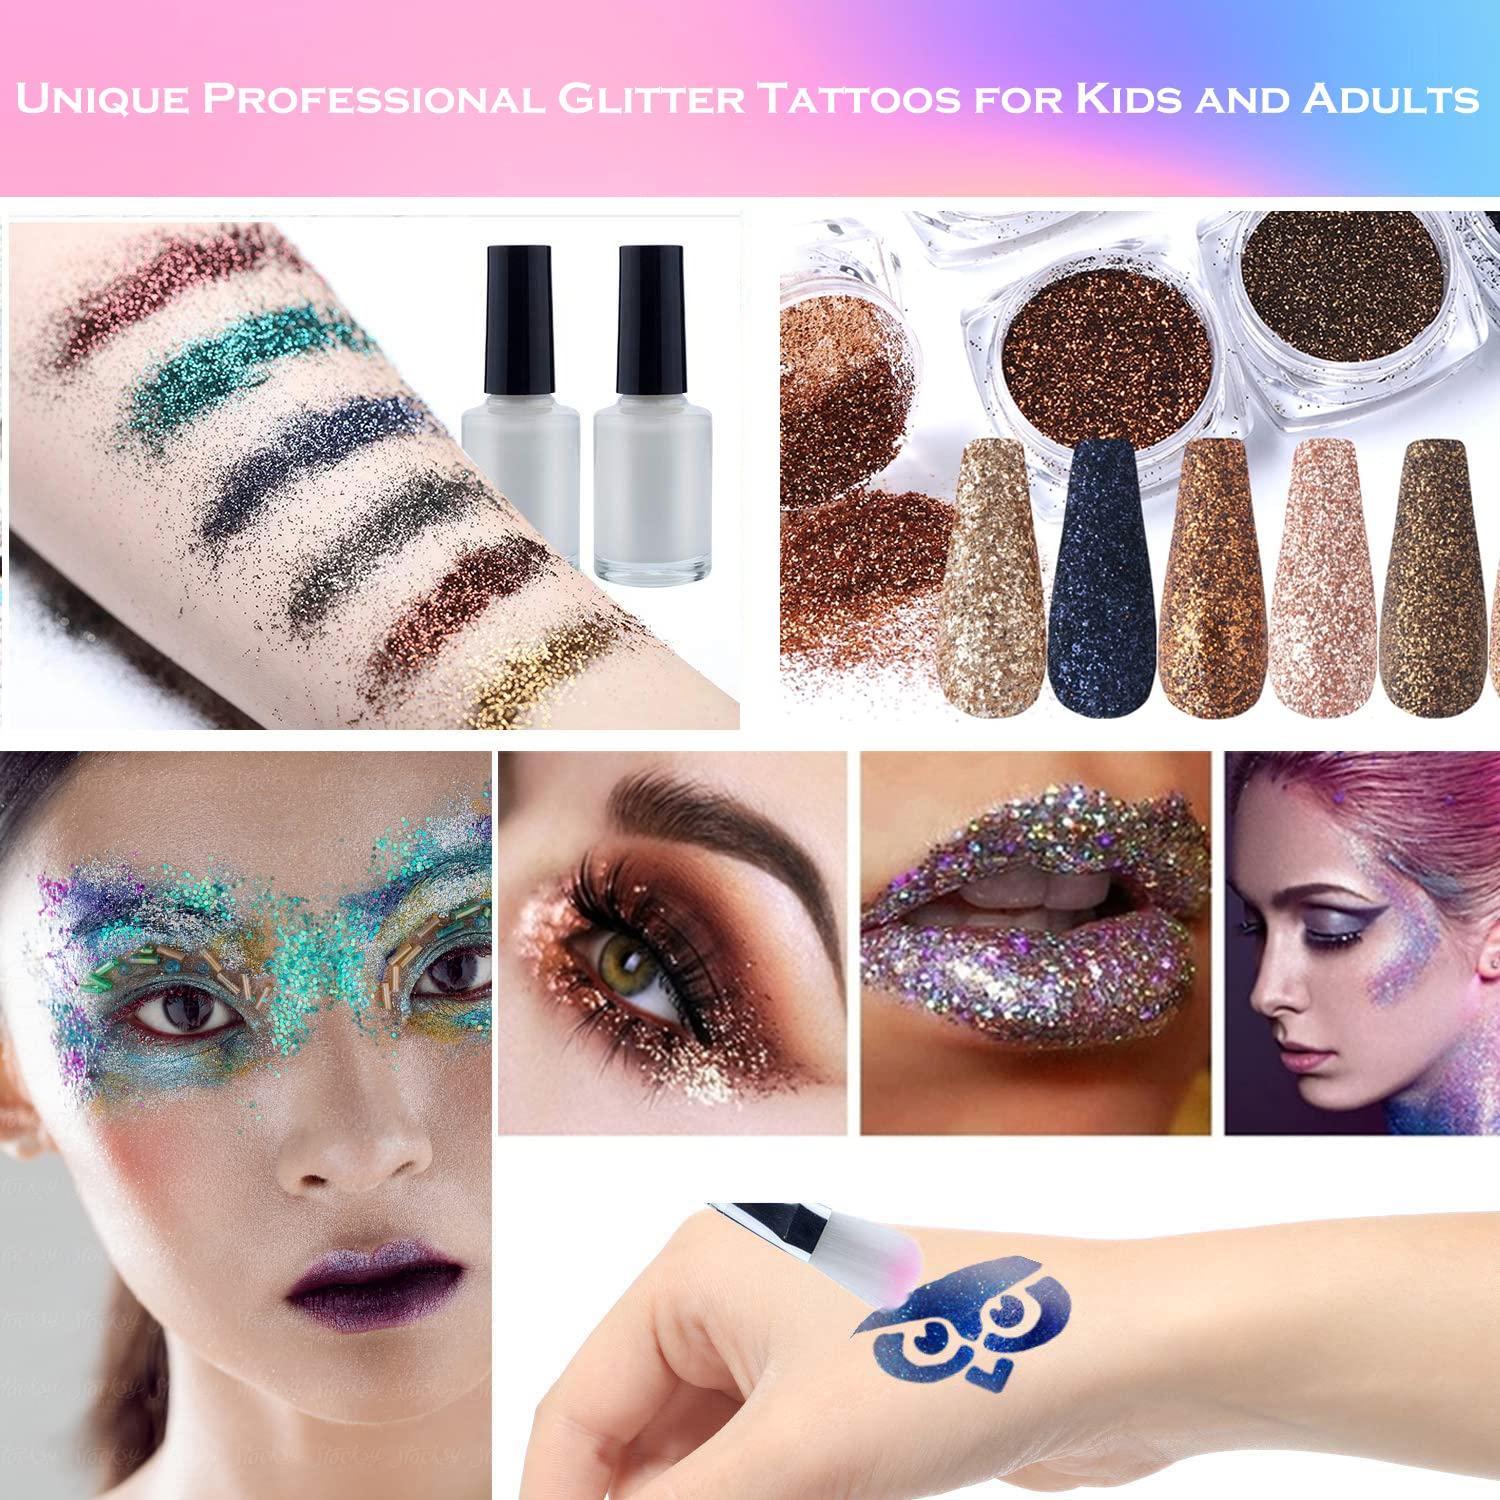 Glitter Tattoo Photo Gallery | Bay Area Face Painters